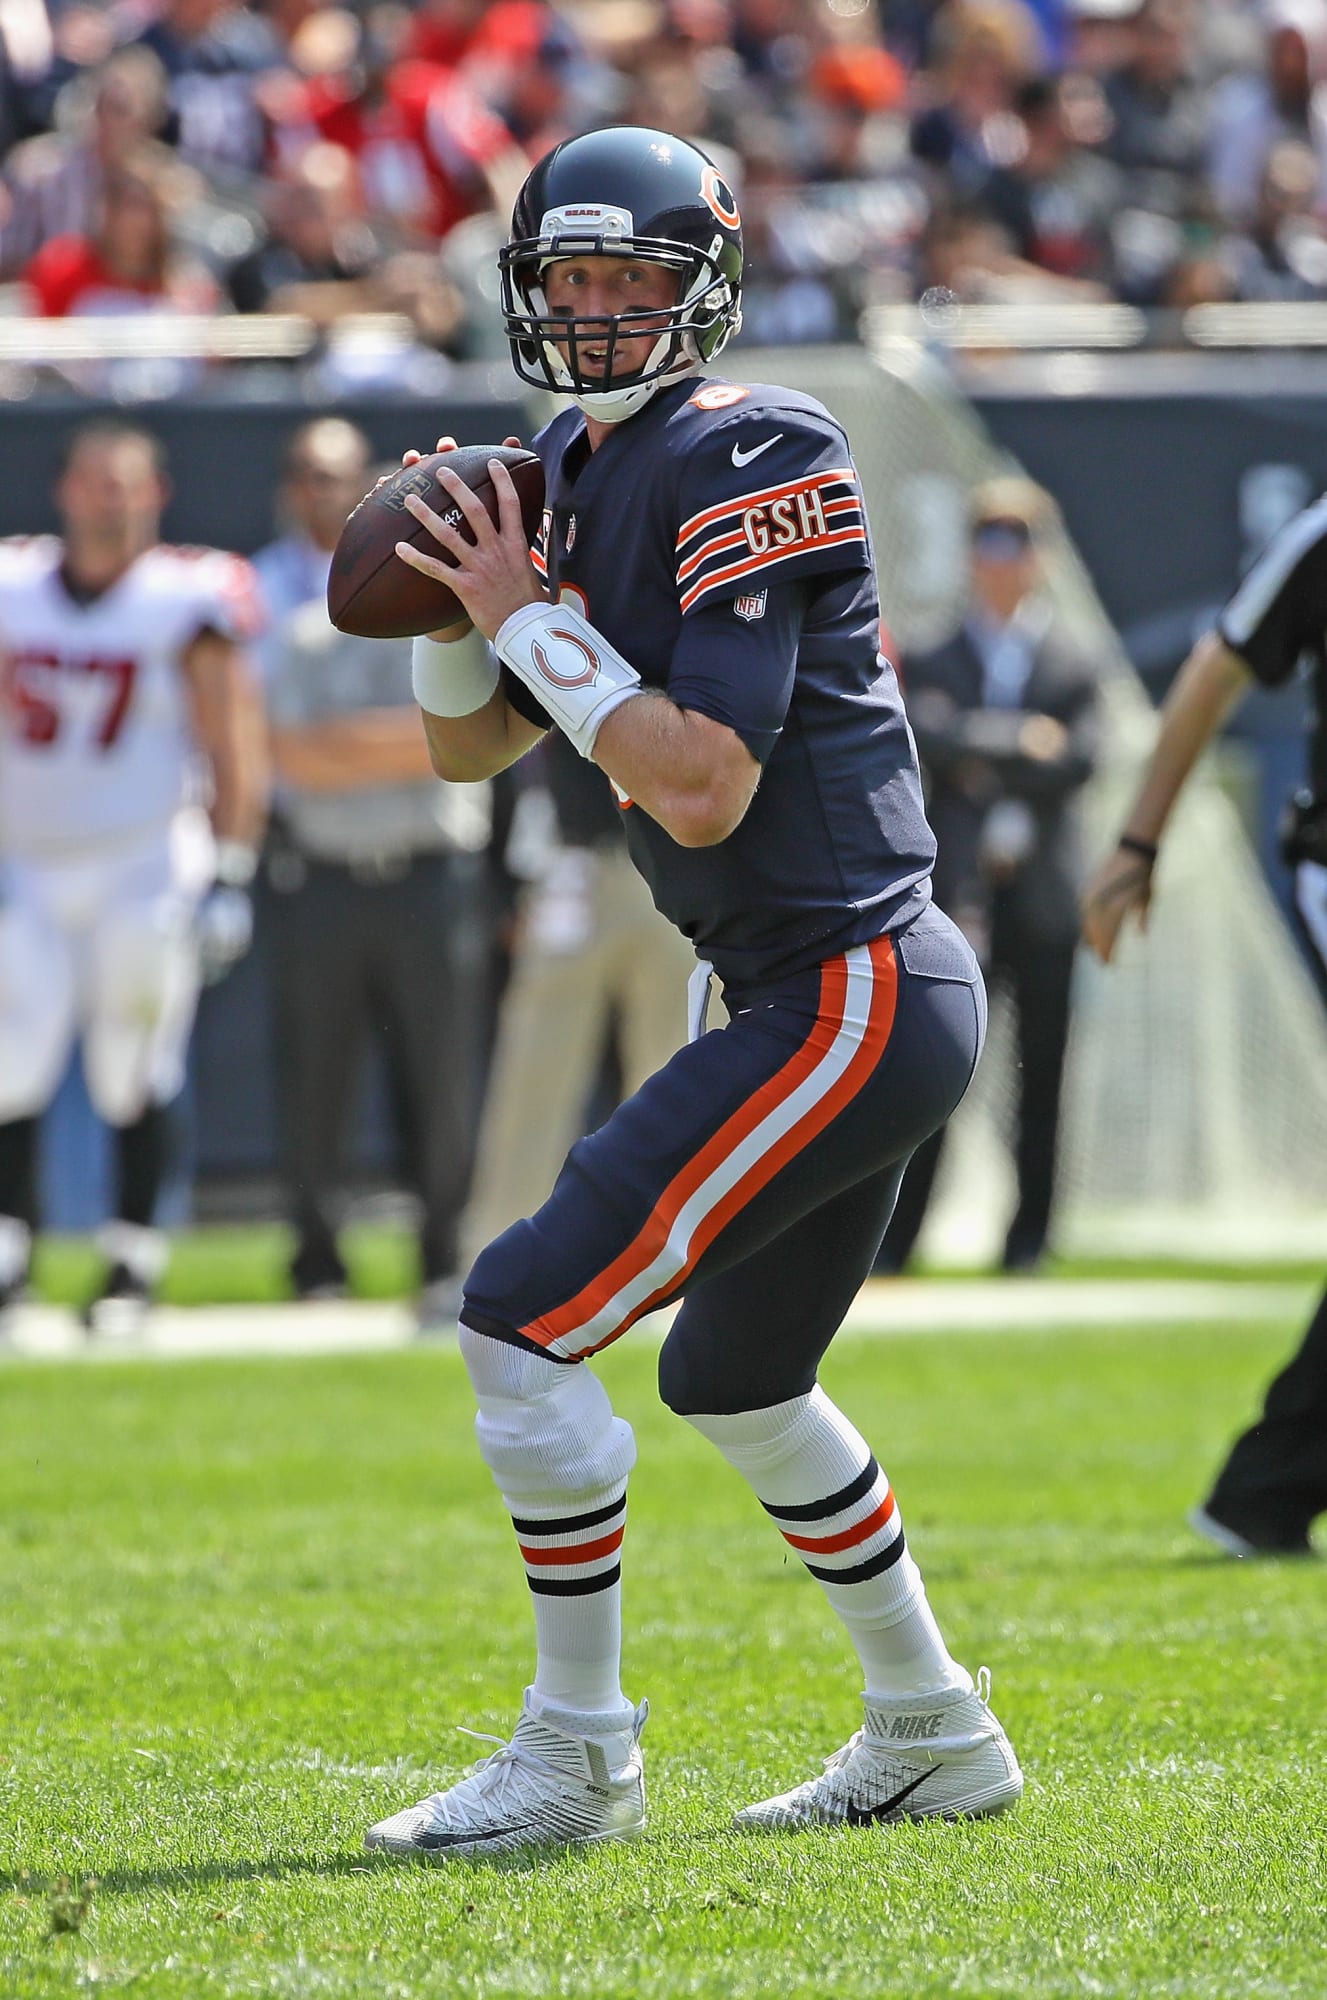 Defining Chicago Bears Quarterback Mike Glennon in one play